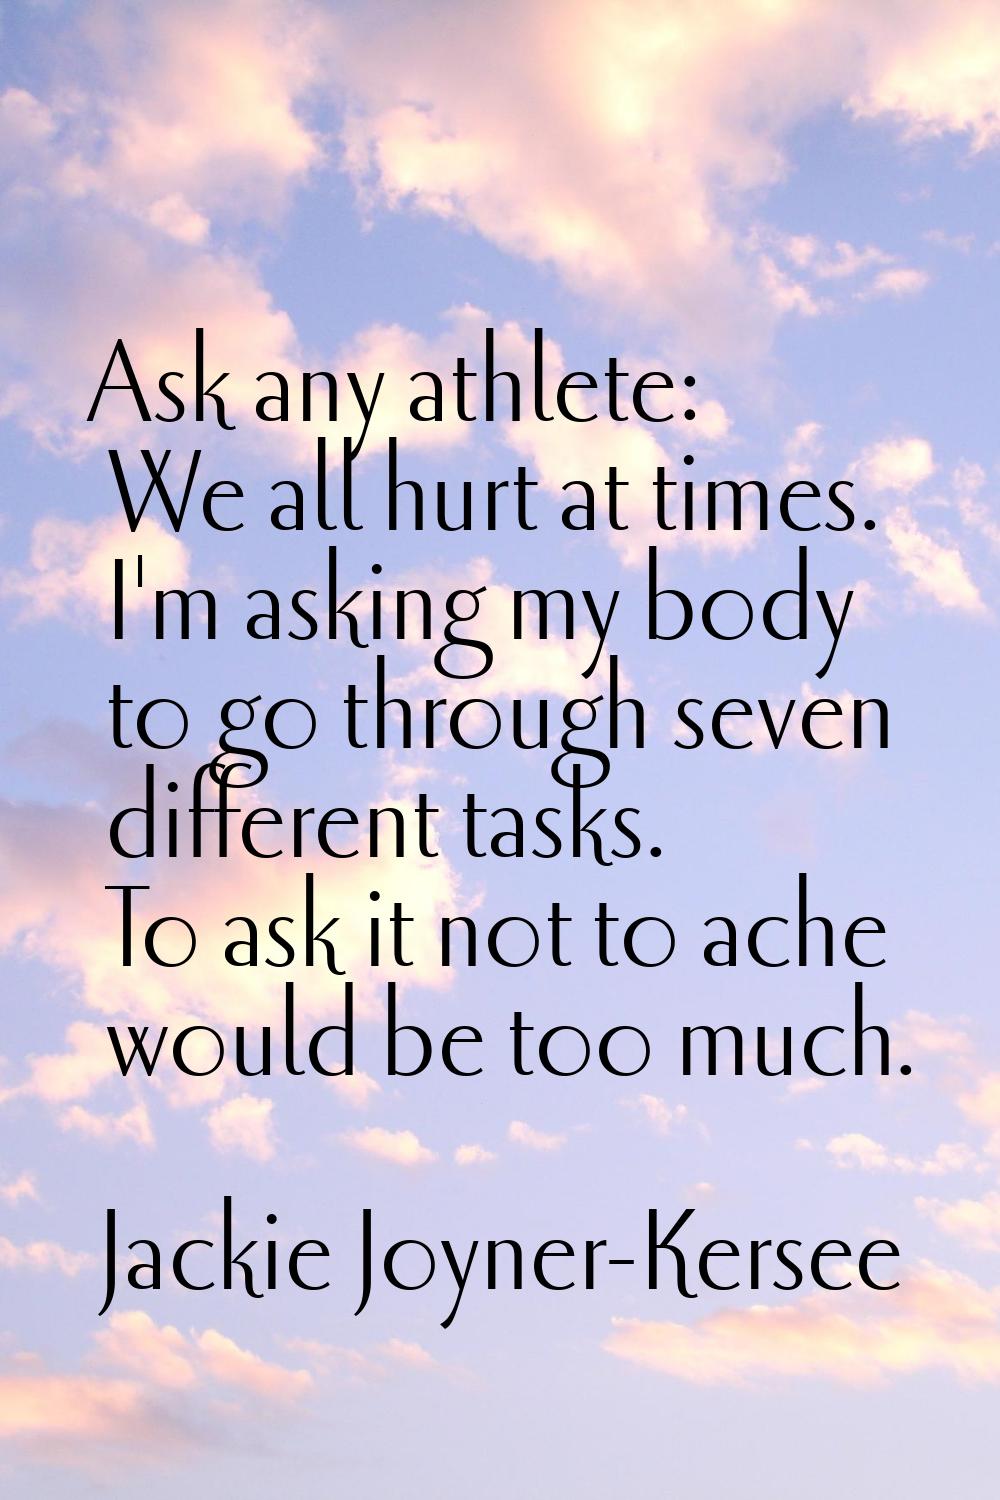 Ask any athlete: We all hurt at times. I'm asking my body to go through seven different tasks. To a